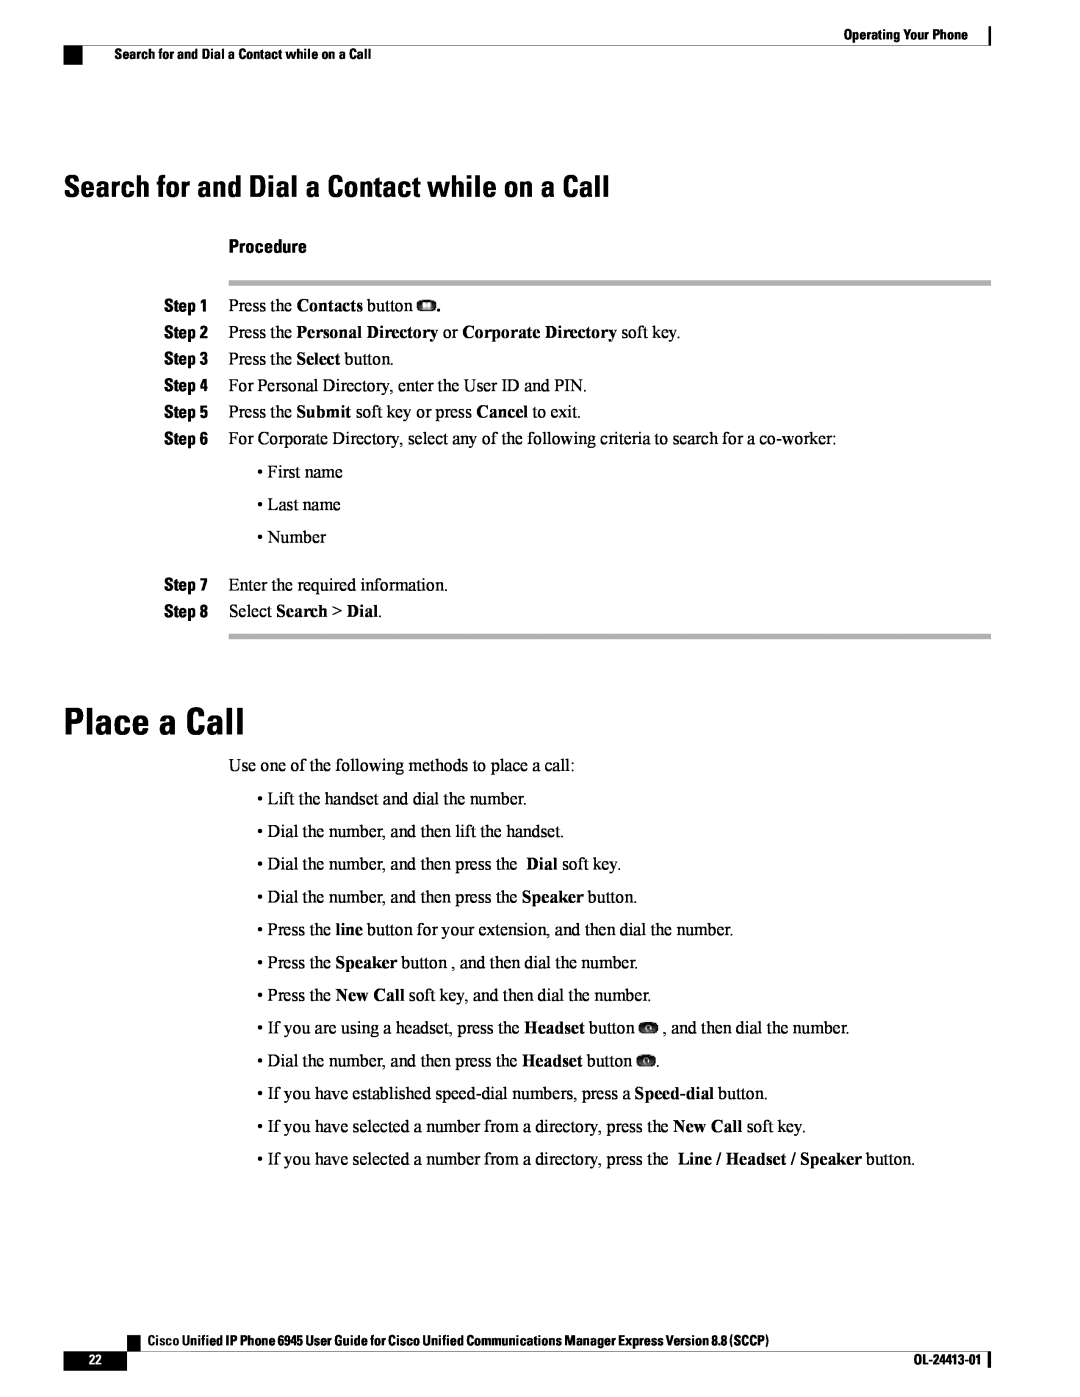 Cisco Systems 6945 manual Place a Call, Search for and Dial a Contact while on a Call, Select Search Dial, Procedure 